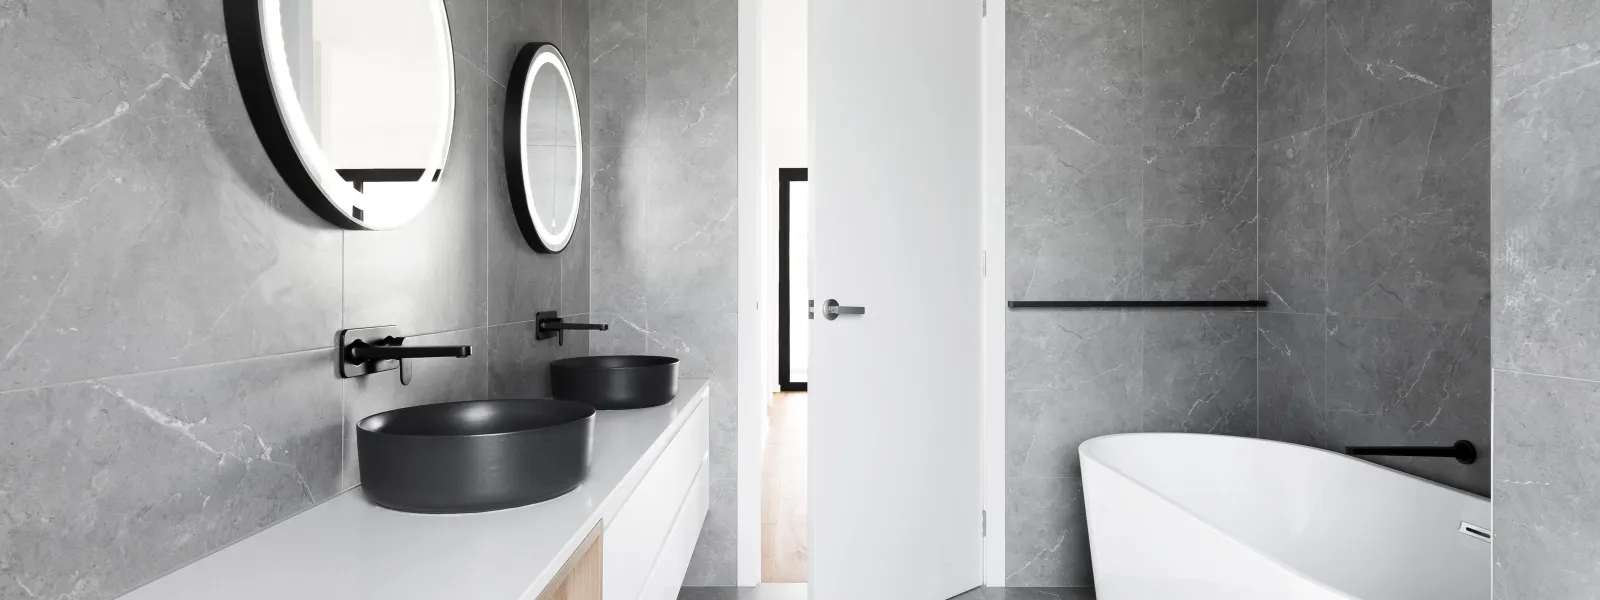 5 Design Trends for Your Bathroom in 2021